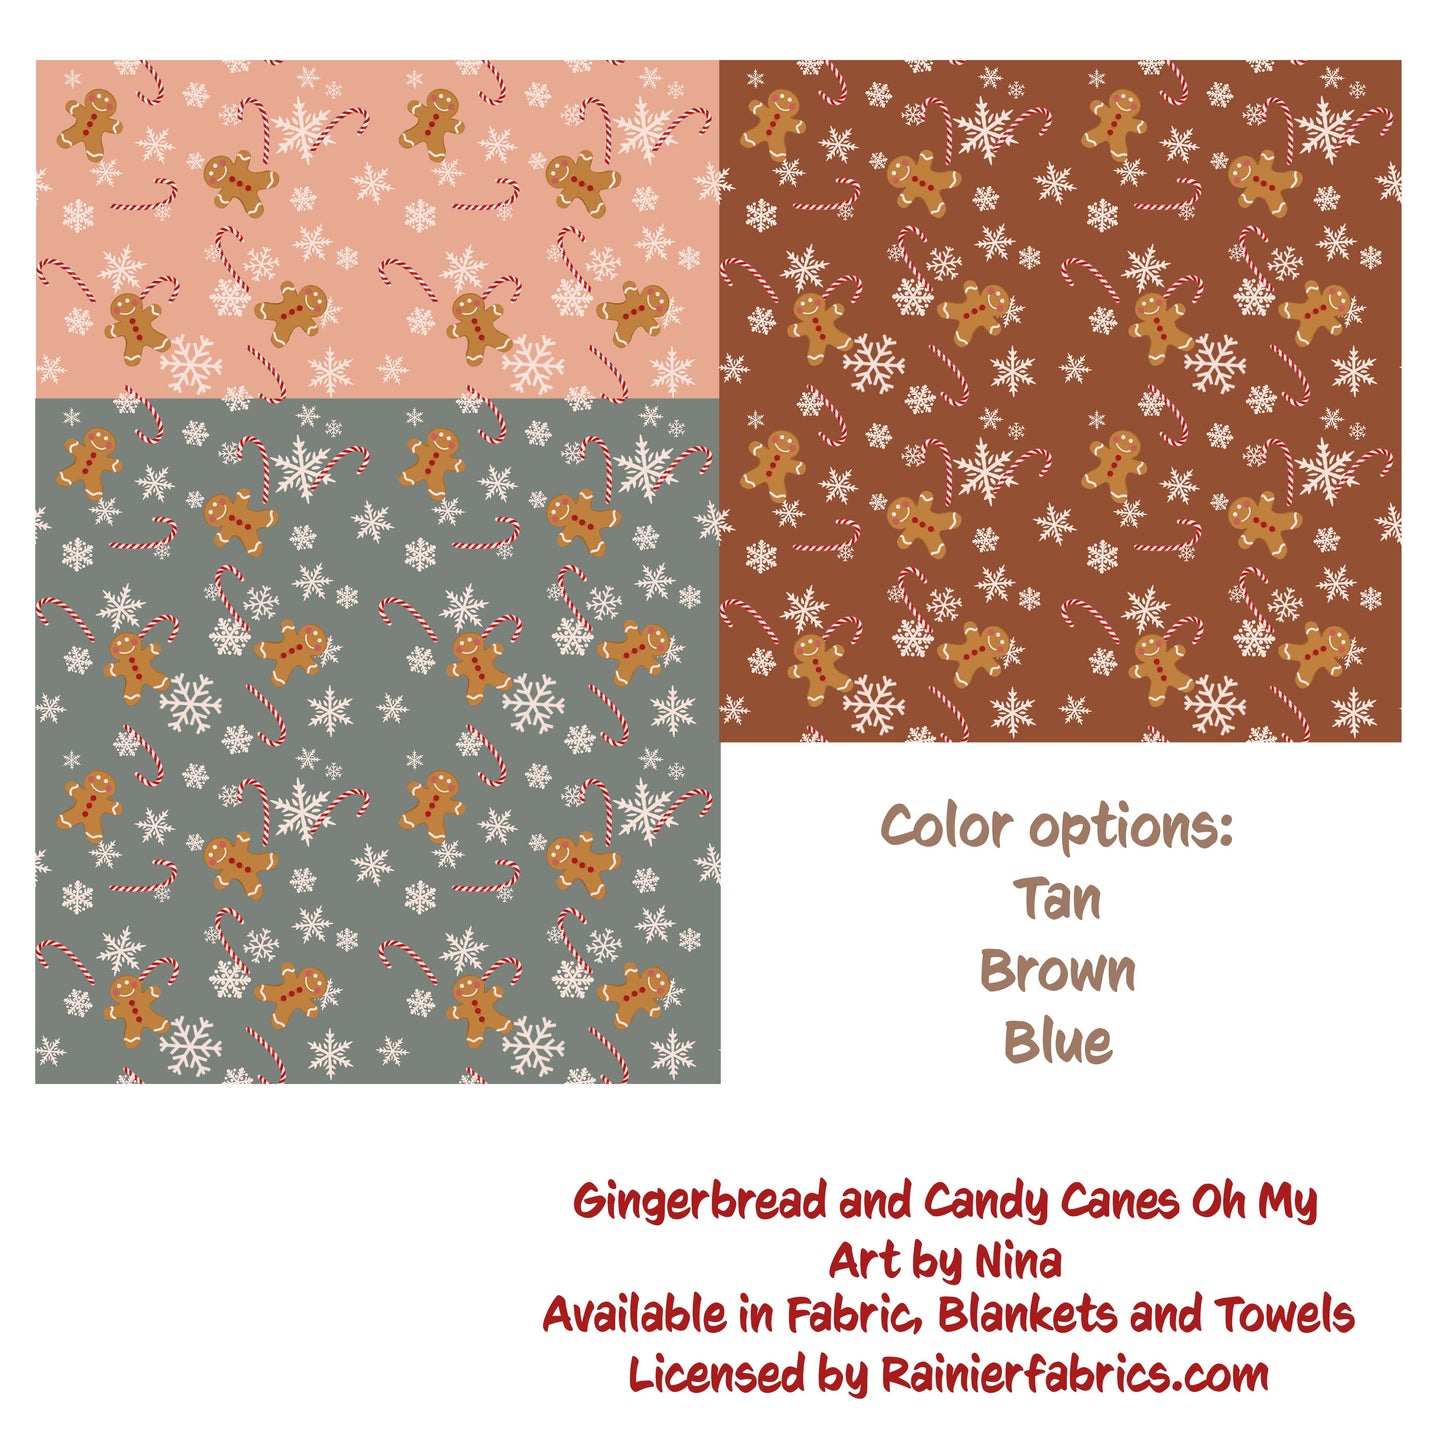 Gingerbread and Candy Canes Oh My - from Nina  - 2-5 day turnaround - Order by 1/2 yard; Description of bases below